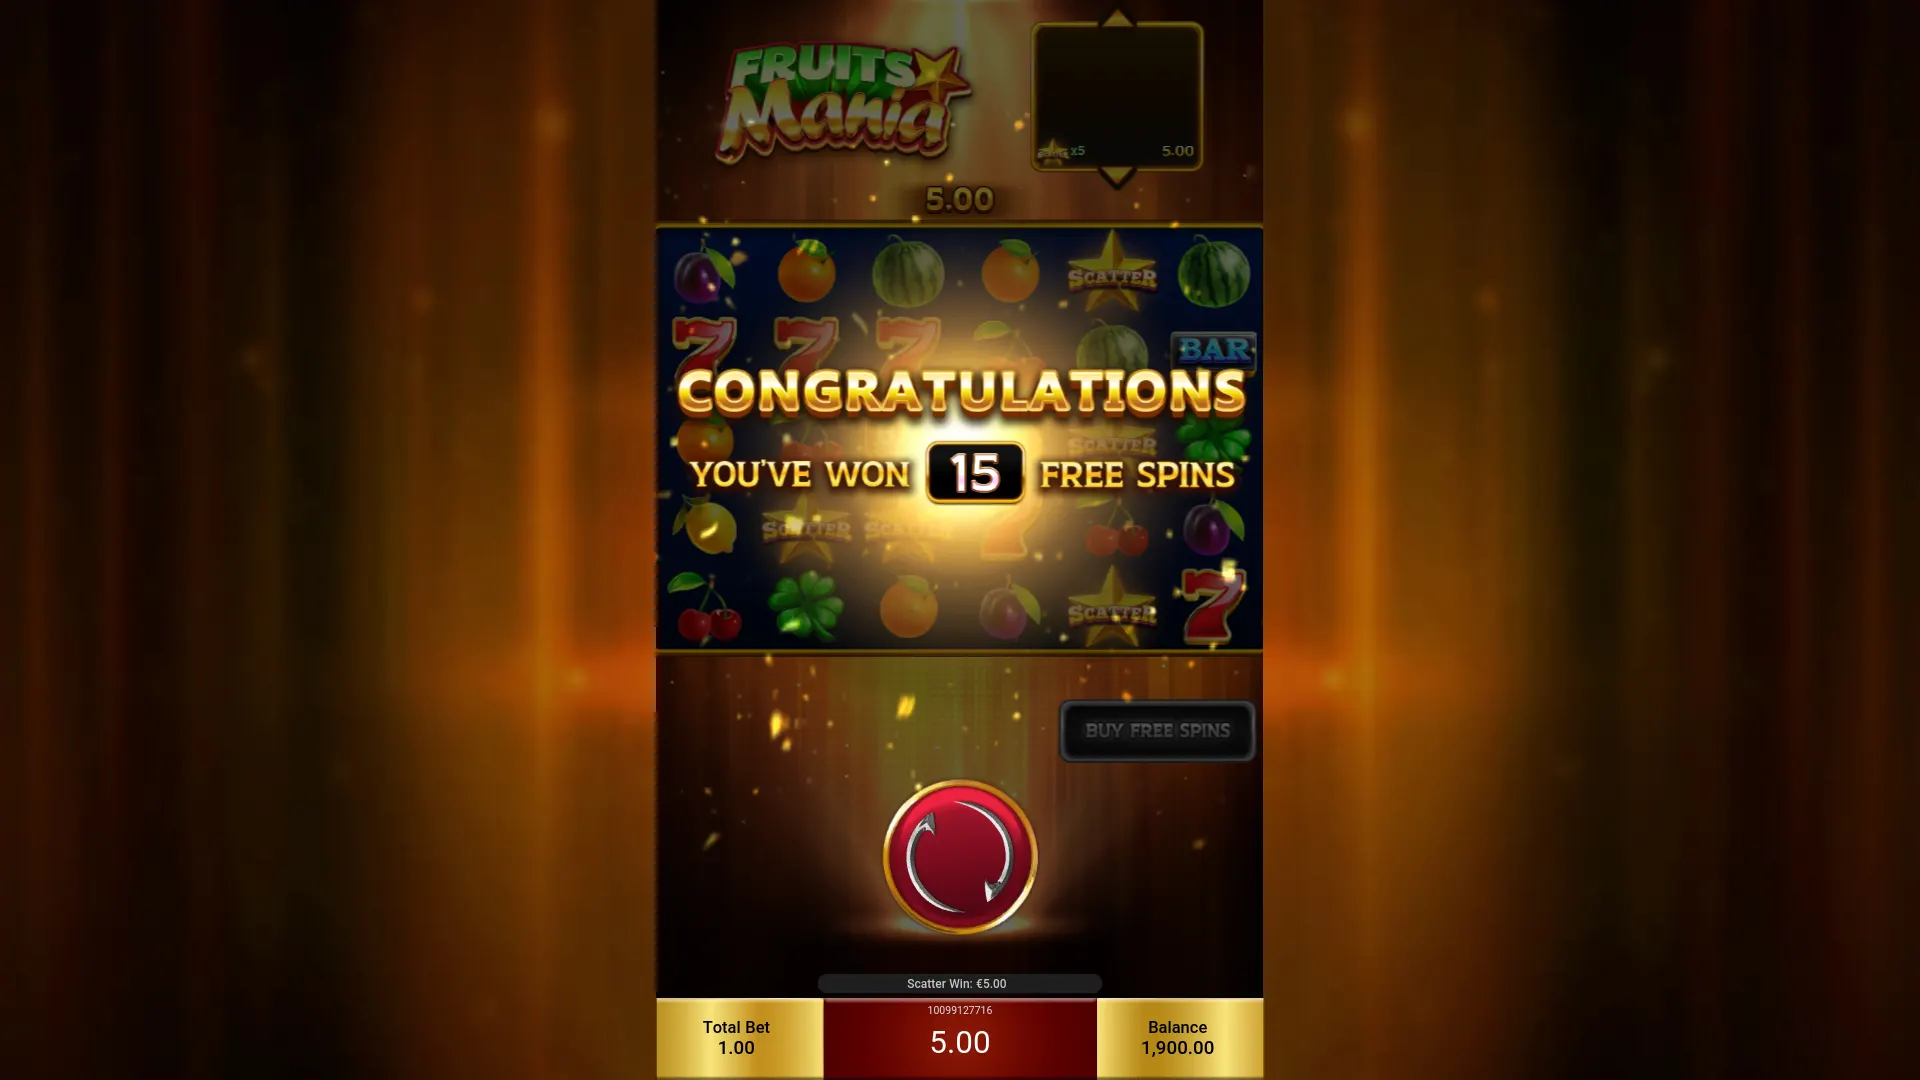 Fruits Mania Free Spins